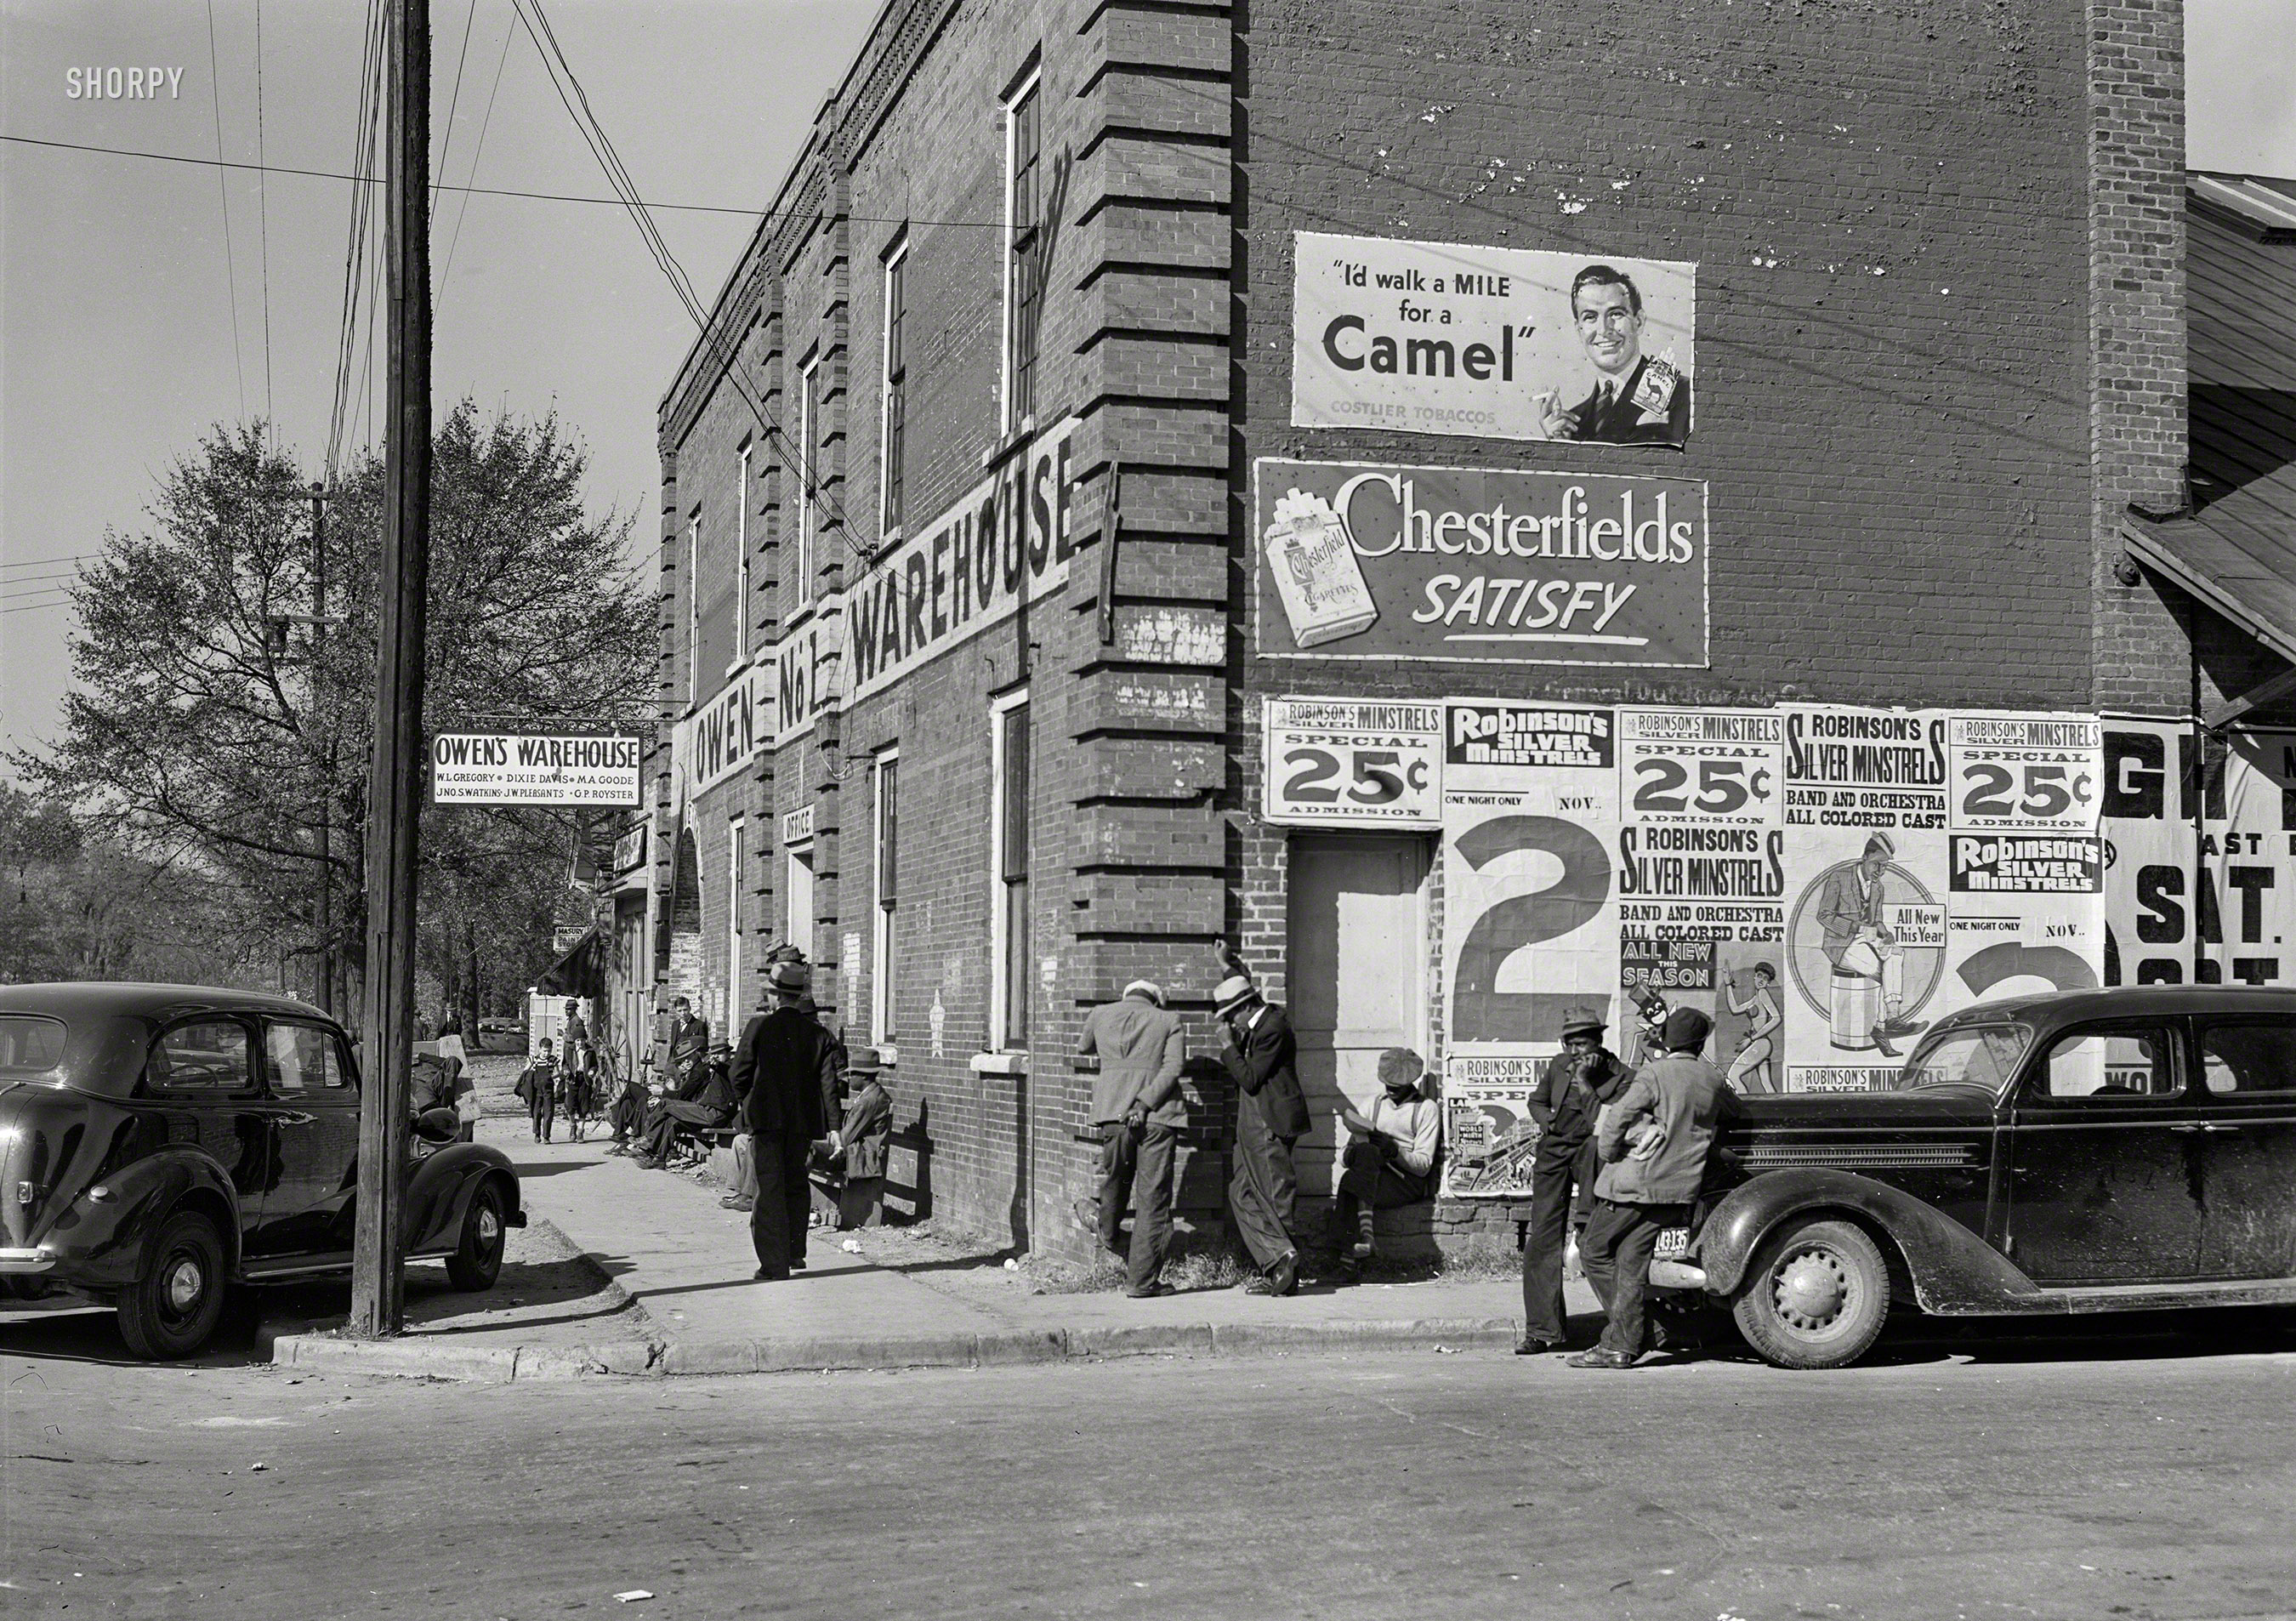 November 1939. "Tobacco warehouse during auction sales in Oxford, Granville County, North Carolina." Photo by Marion Post Wolcott. View full size.